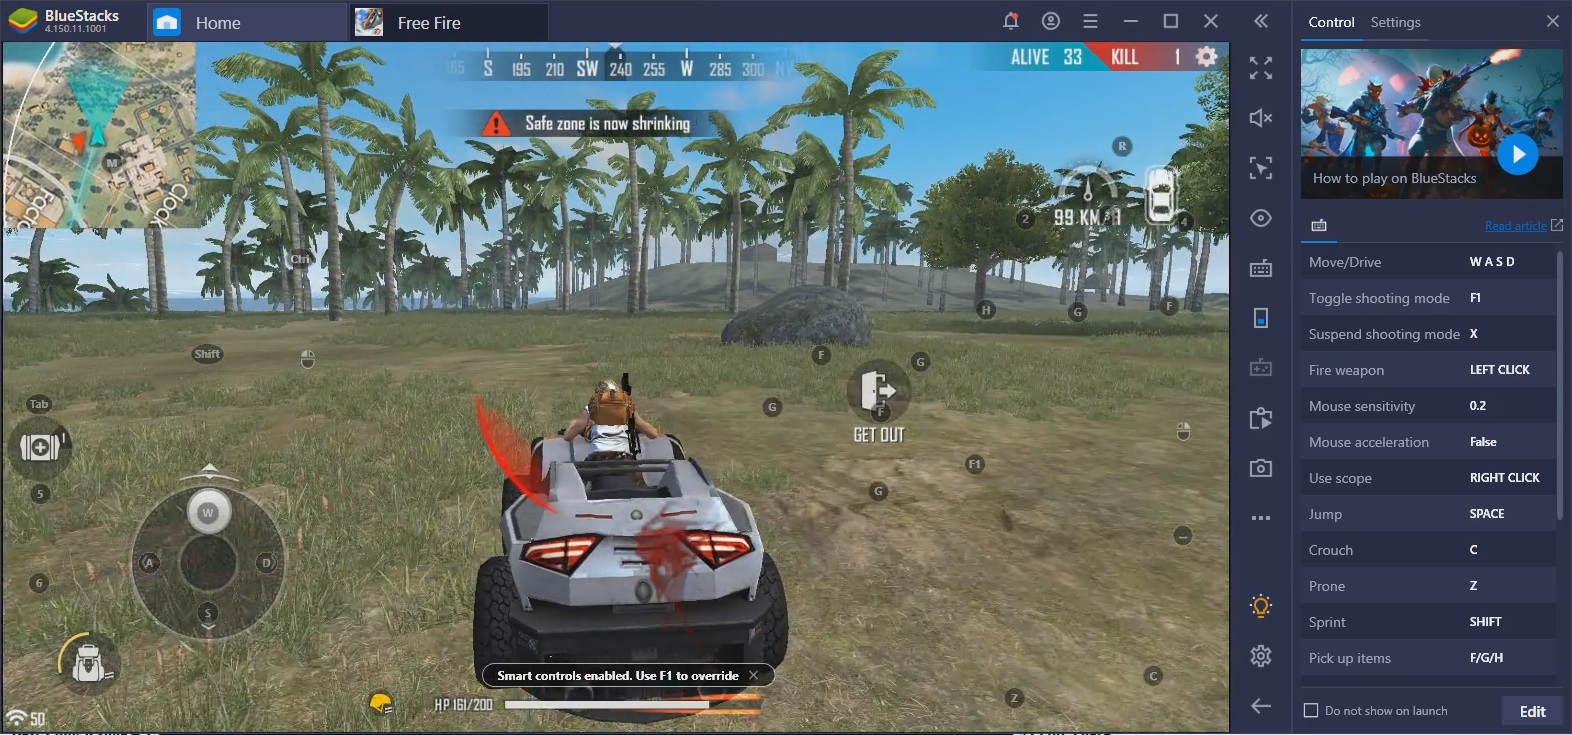 BlueStacks Game Controls: Play Android Games on PC with Keyboard and Mouse or Gamepad